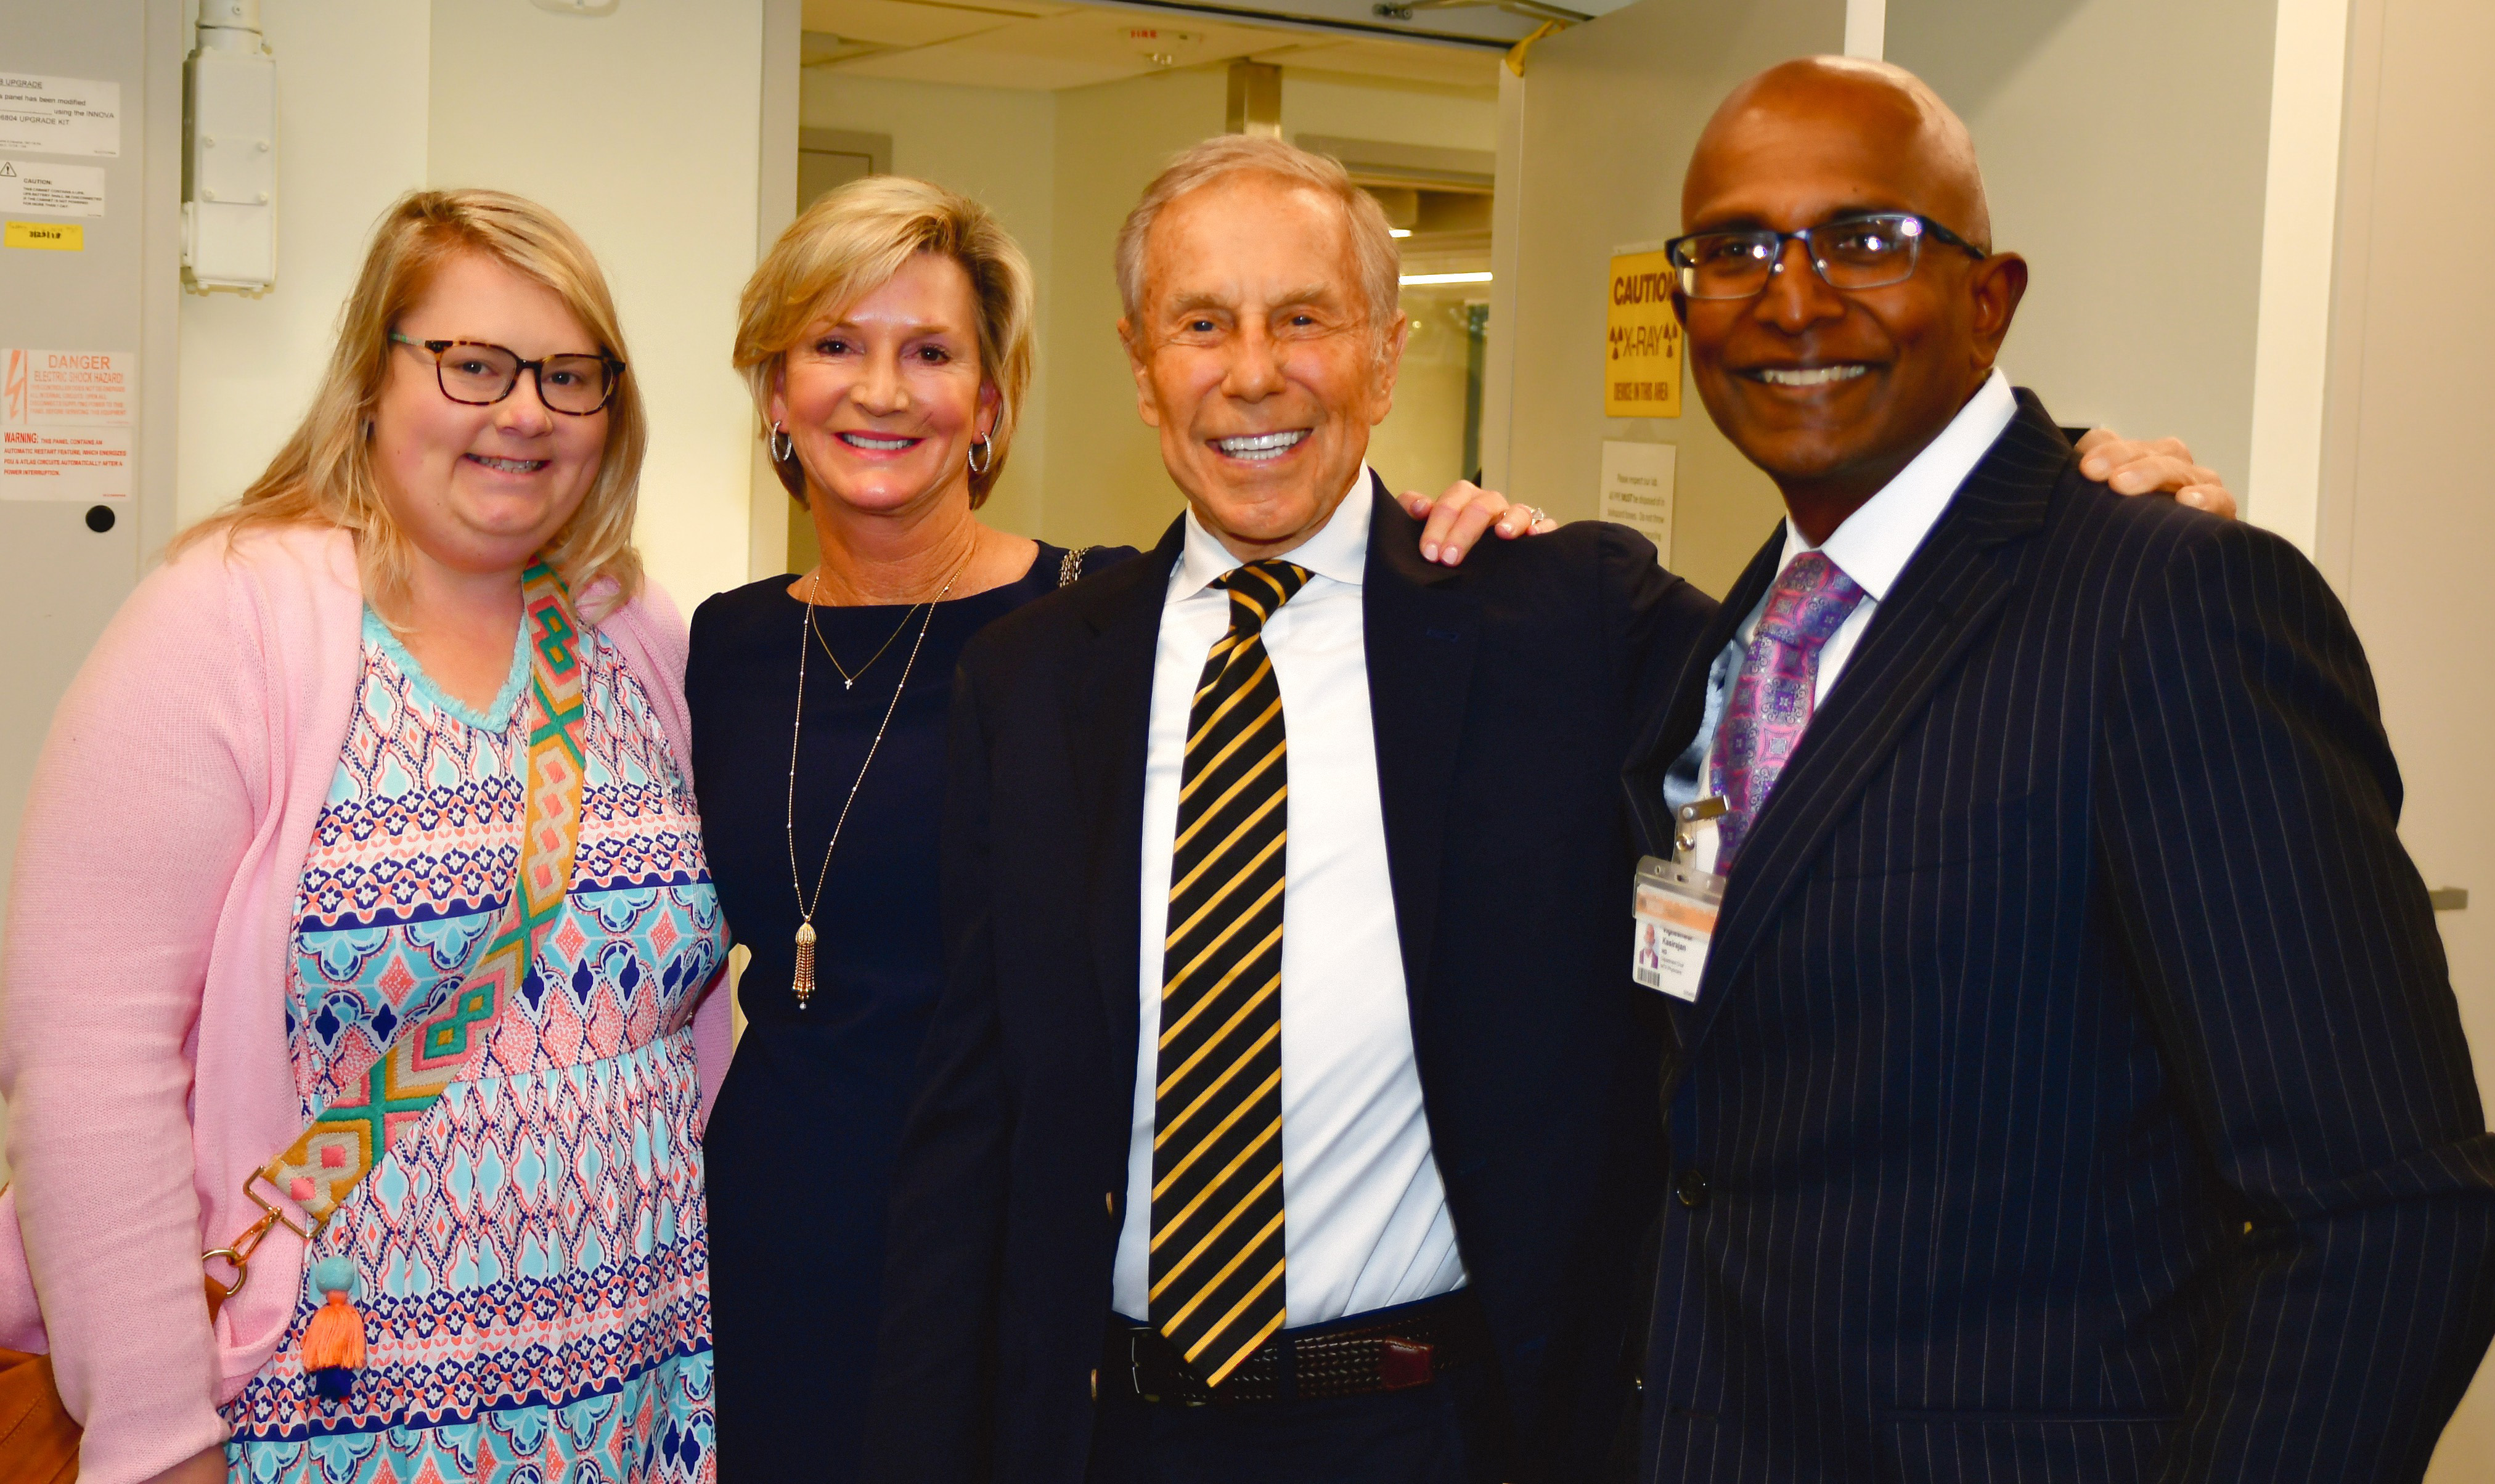 A $1 million gift from Christy and David Cottrell (center) led the way for a $5 million renovation to establish a Surgical Innovation Suite that now bears their name. The couple is flanked by daughter Leah Rose (left) and Vigneshwar Kasirajan, M.D., Stuart McGuire Chair of the VCU Department of Surgery (right). (Photo by Joe Morris)